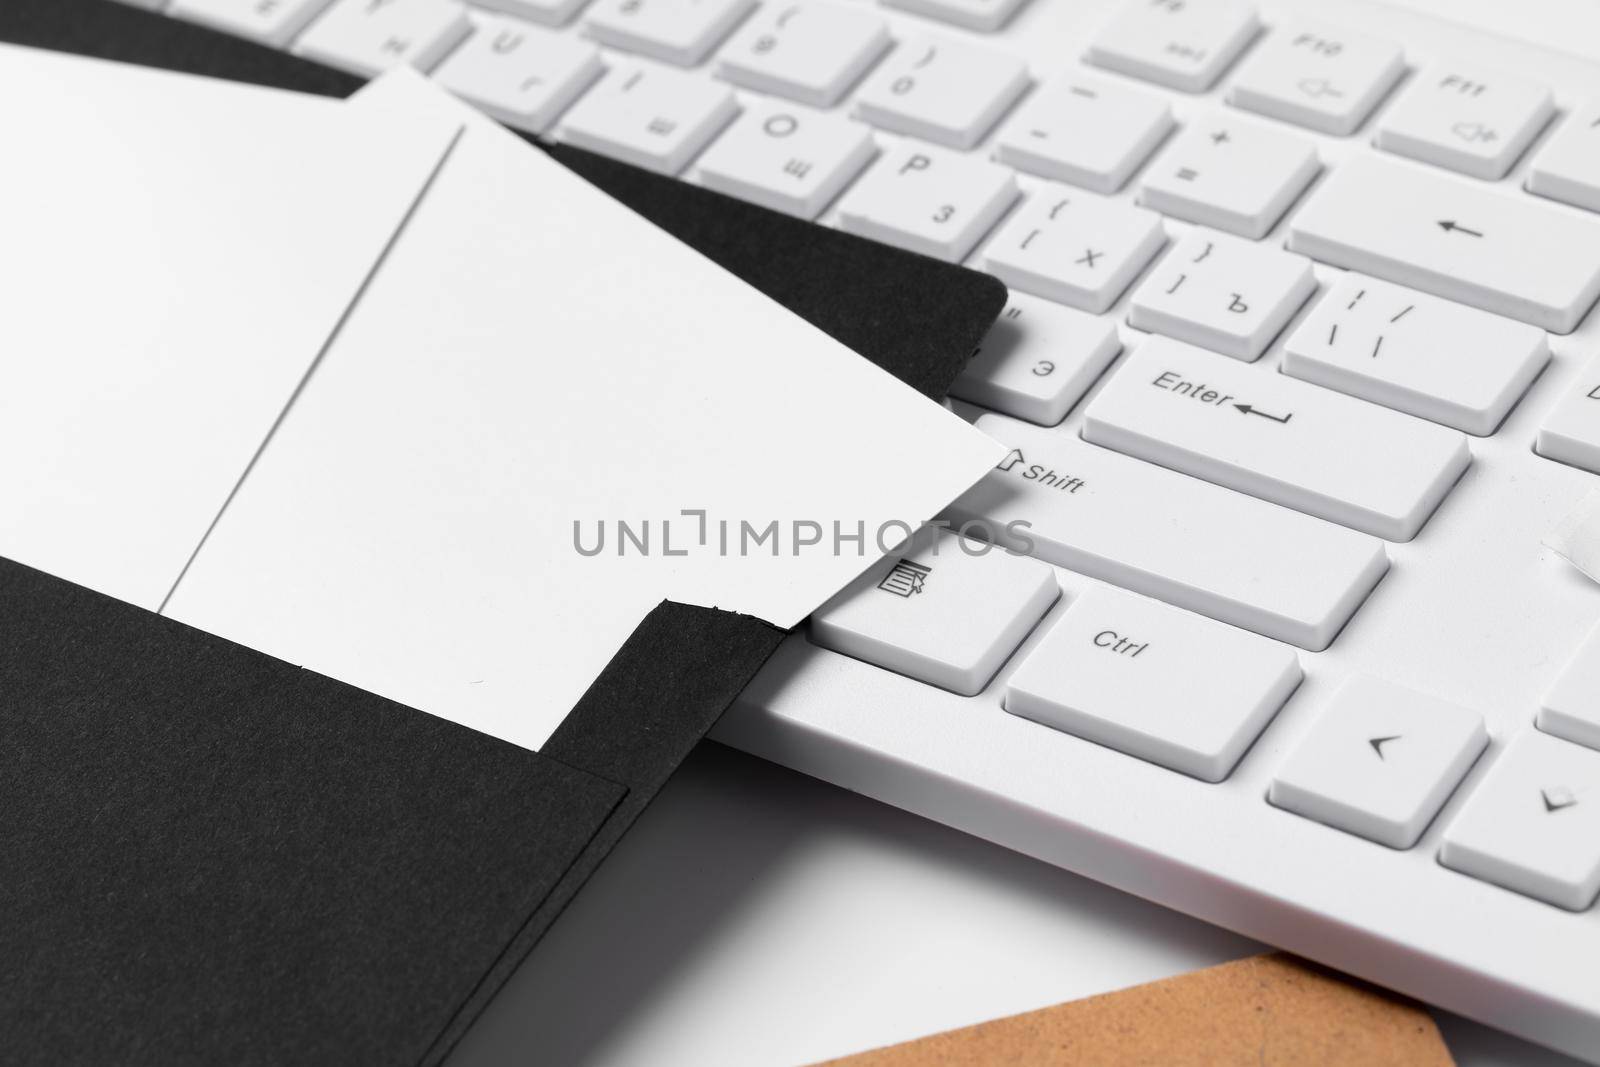 Blank business cards with supplies and keyboard on office table. by Fabrikasimf